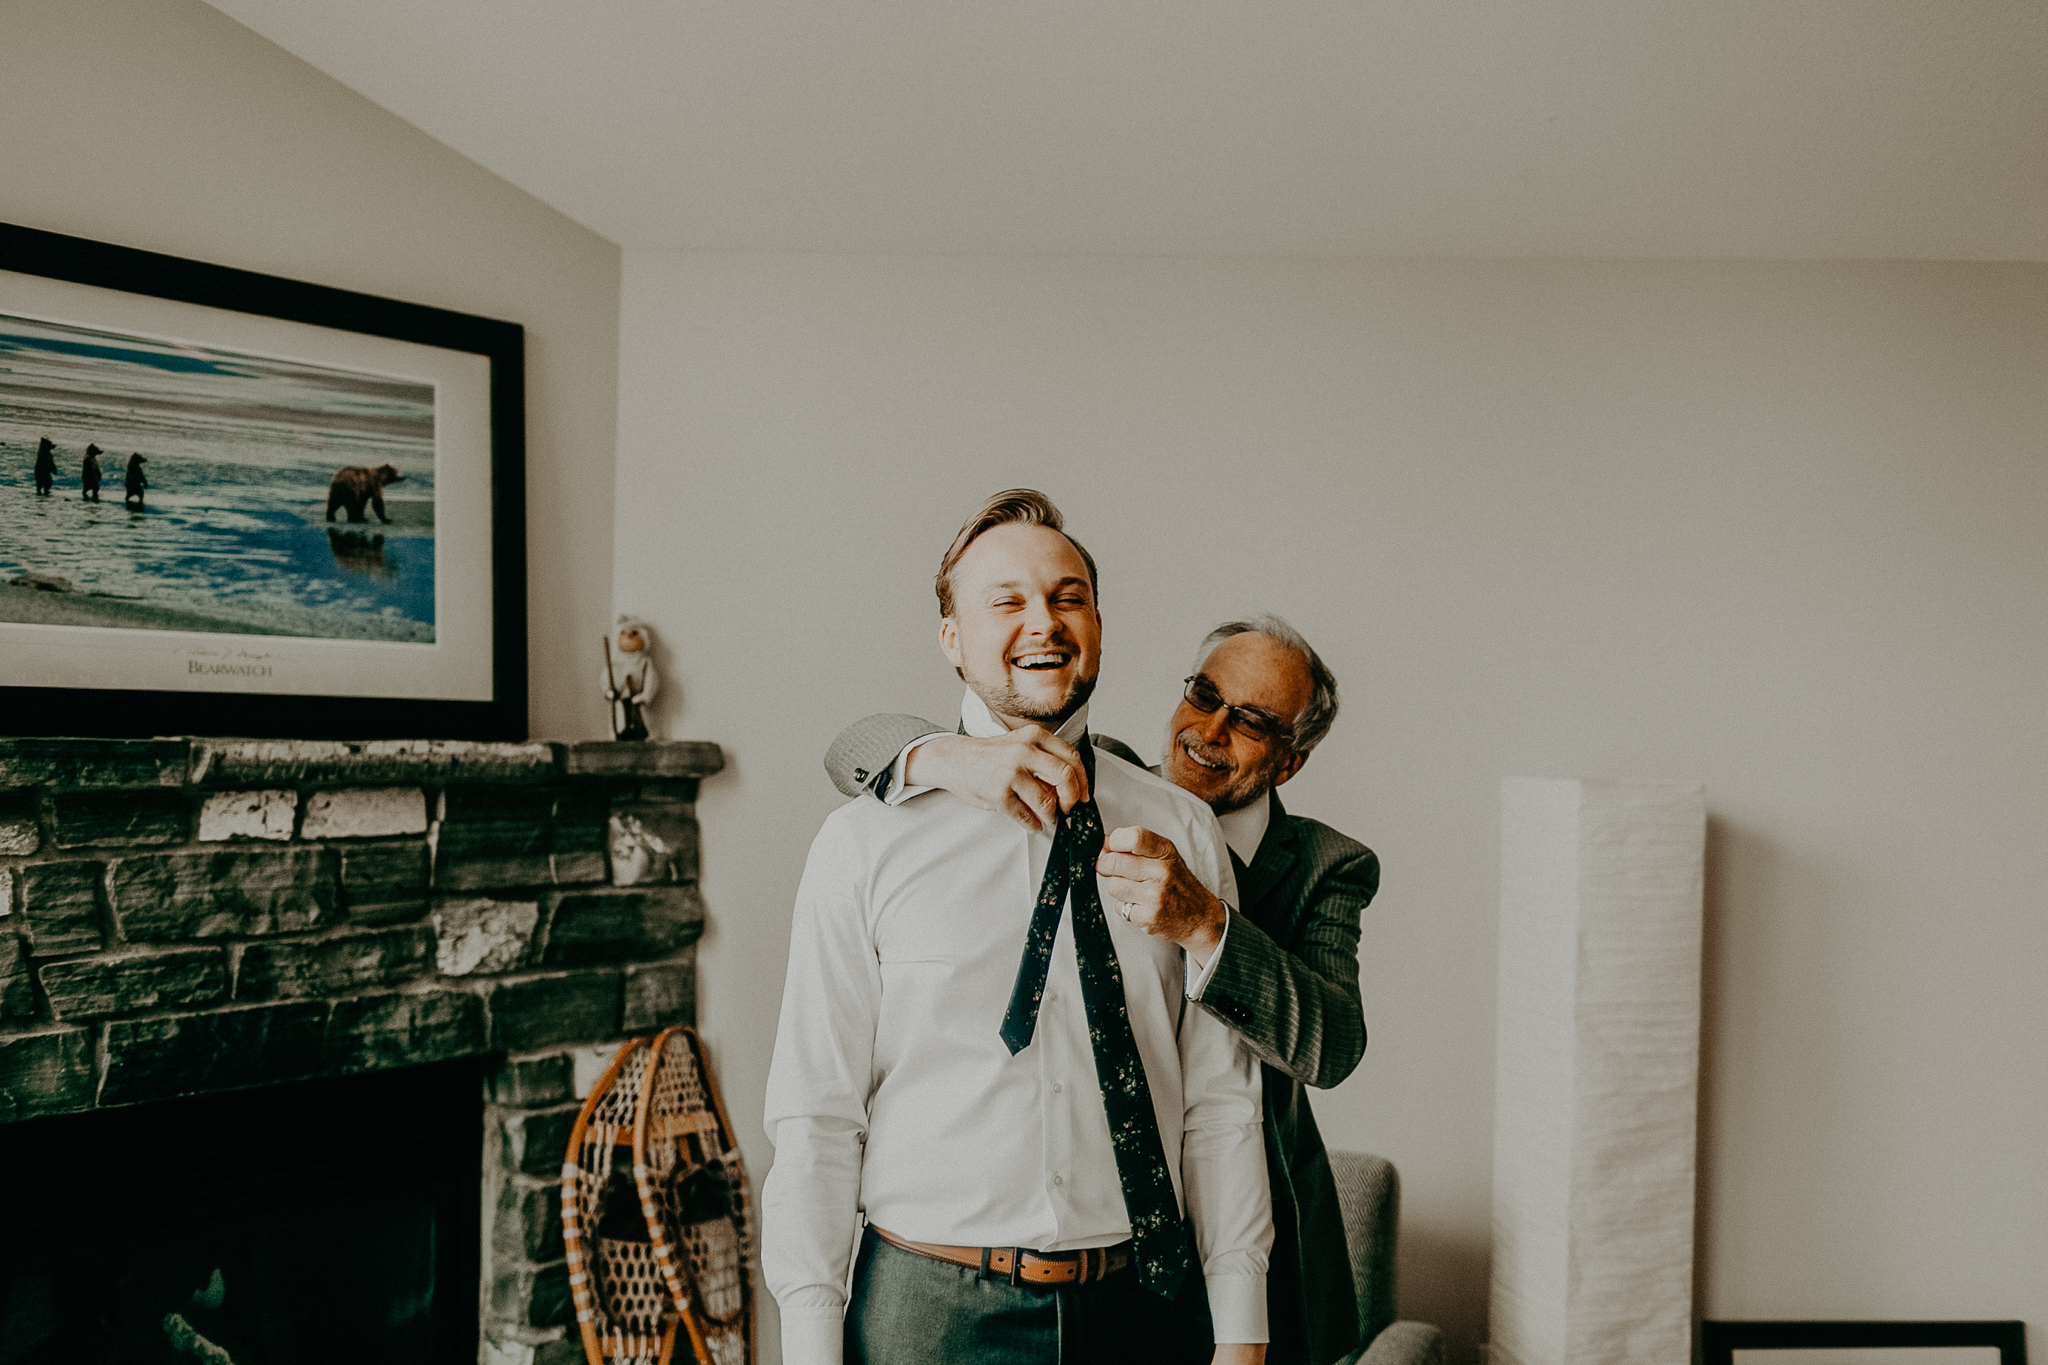 Groom's dad helps groom tie on tie in hotel room while getting ready for wedding